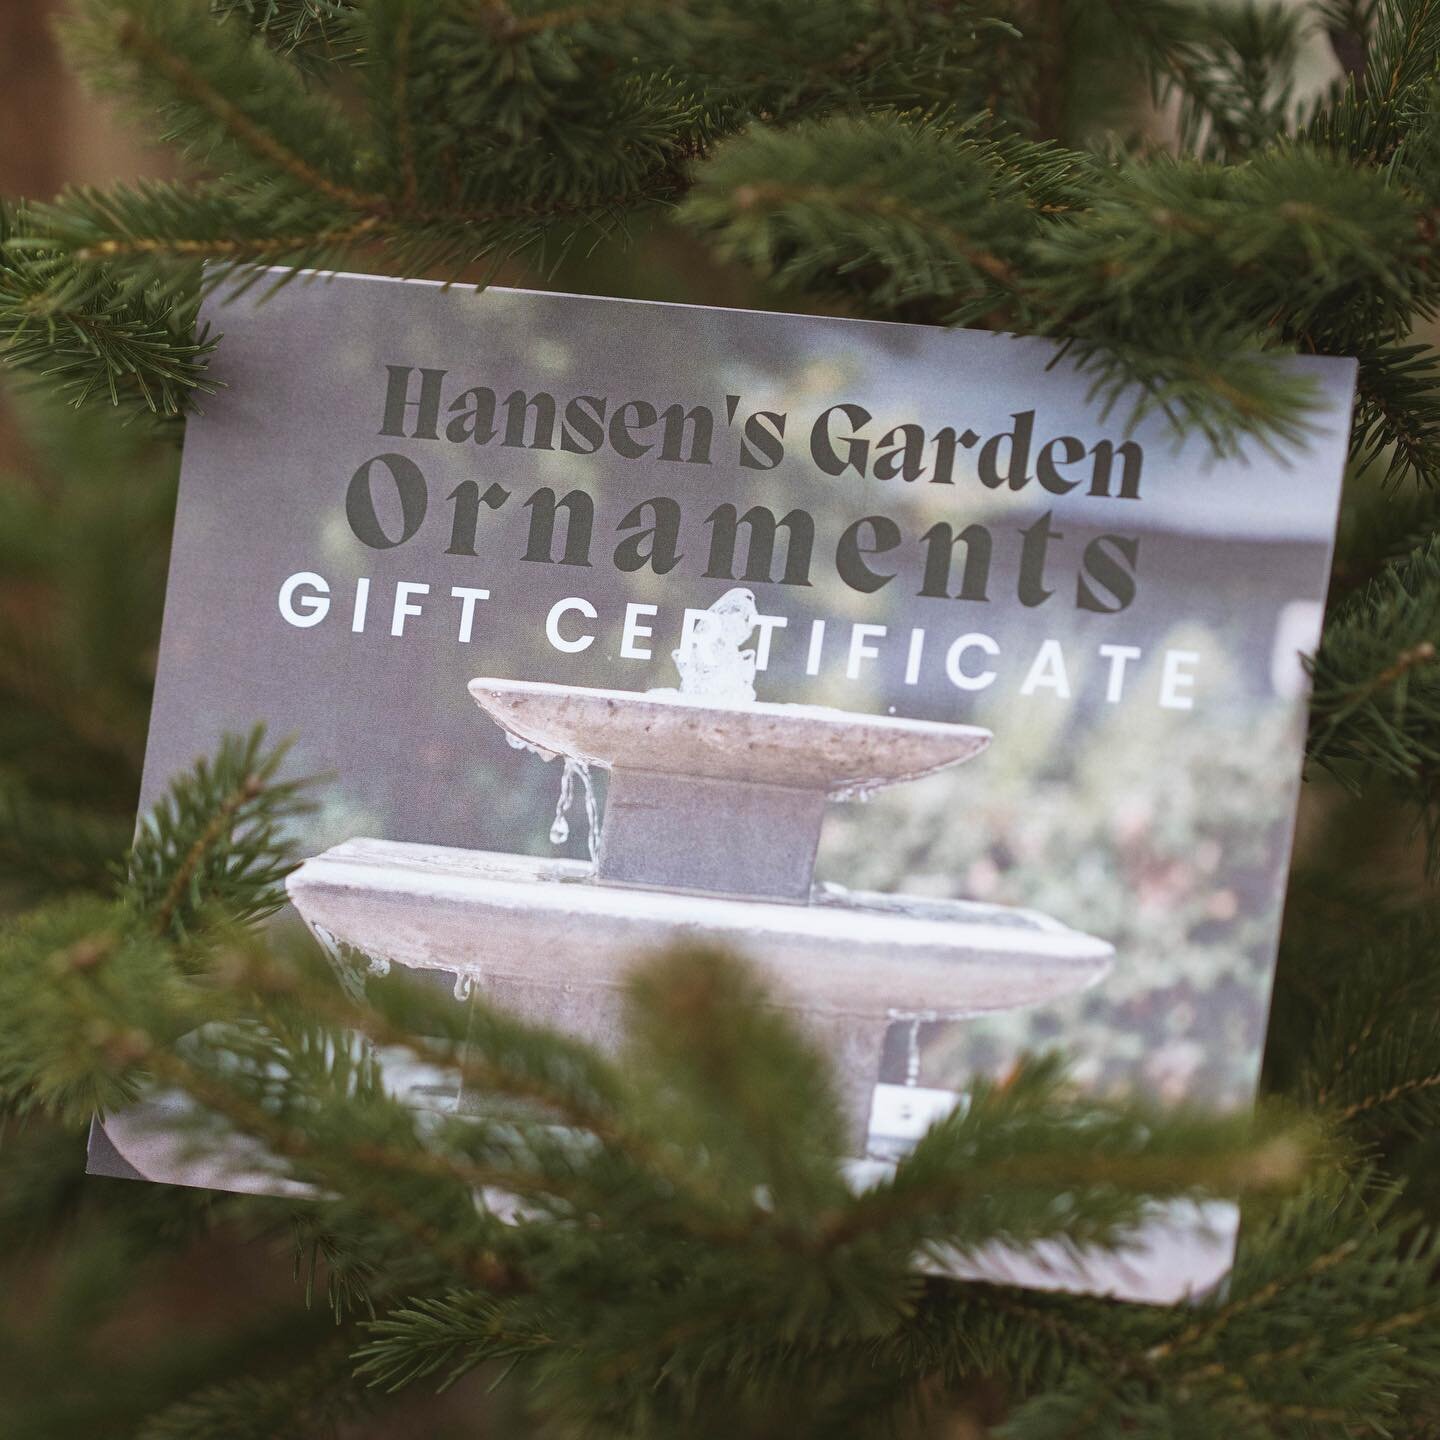 Hansen's Garden Ornaments is offering GIFT CERTIFICATES this holiday season.
With values from $25 to $250, Gift Certificates are good towards any Items, fountains or custom orders at Hansen's Garden Ornaments, and do not expire.

Link in bio!! 
Also 